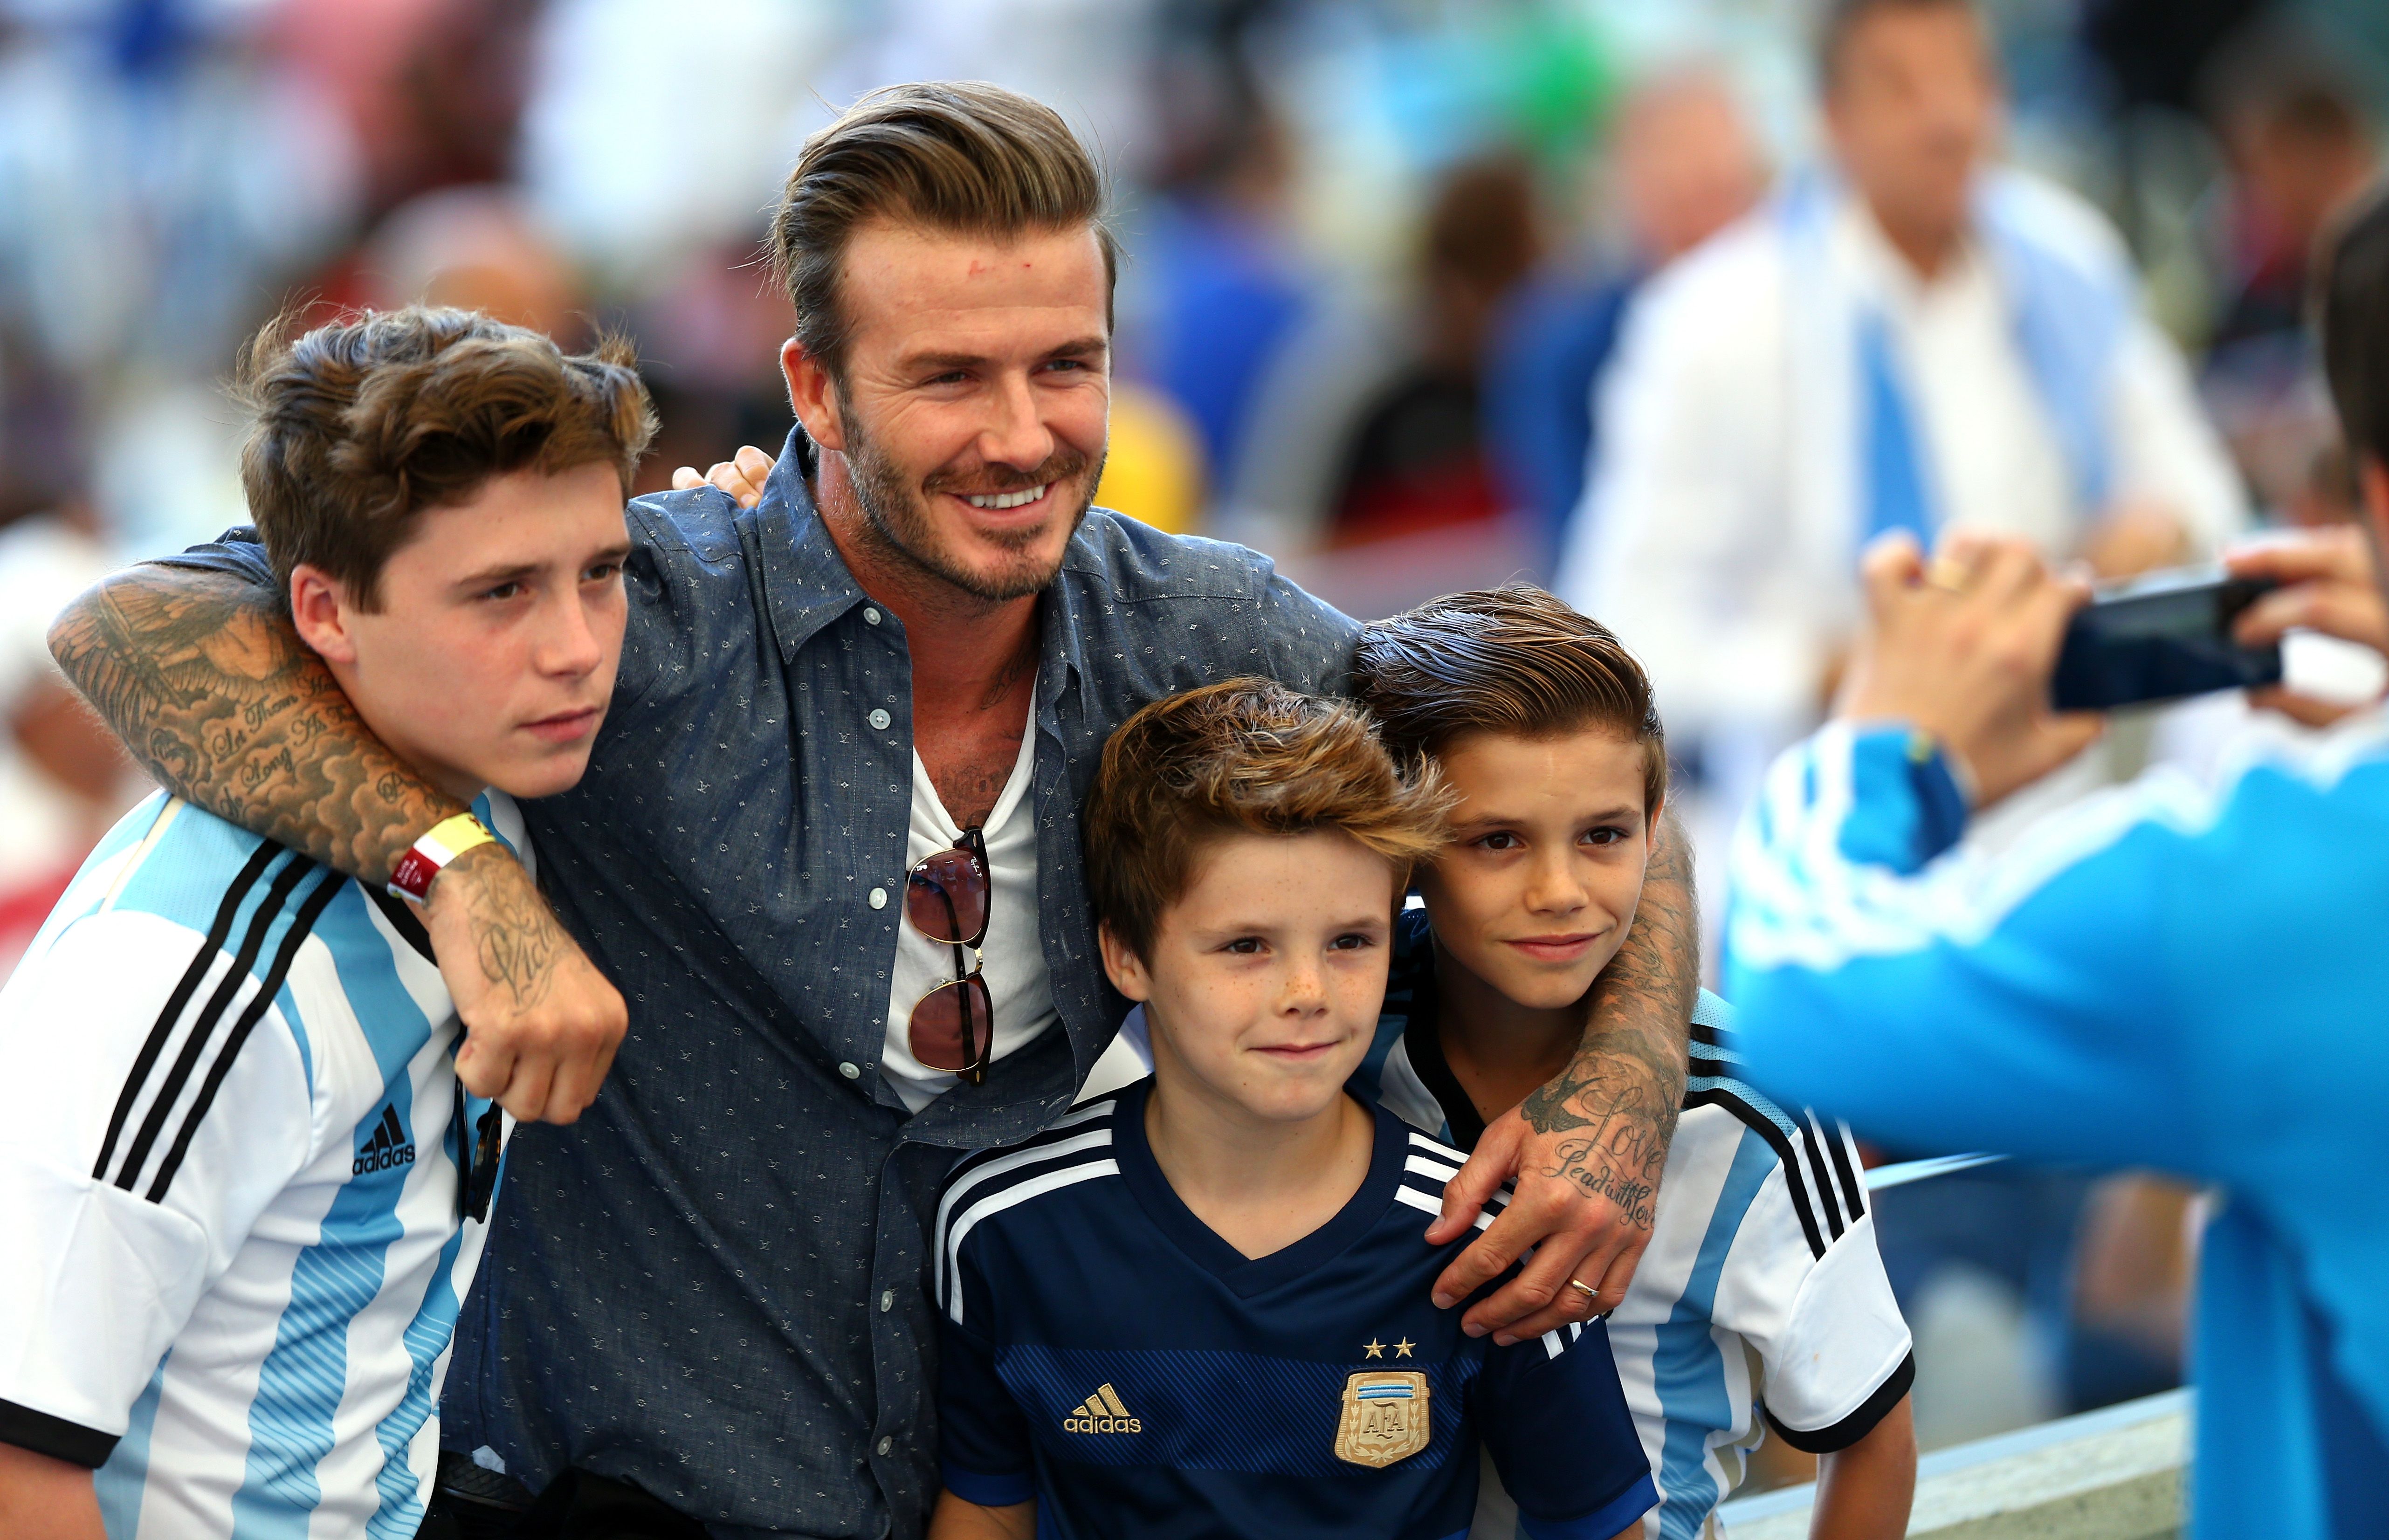 David Beckham and sons Brooklyn, Cruz, and Romeo at the 2014 FIFA World Cup Brazil Final match at Maracana on July 13, 2014 in Rio de Janeiro, Brazil. | Source: Getty Images